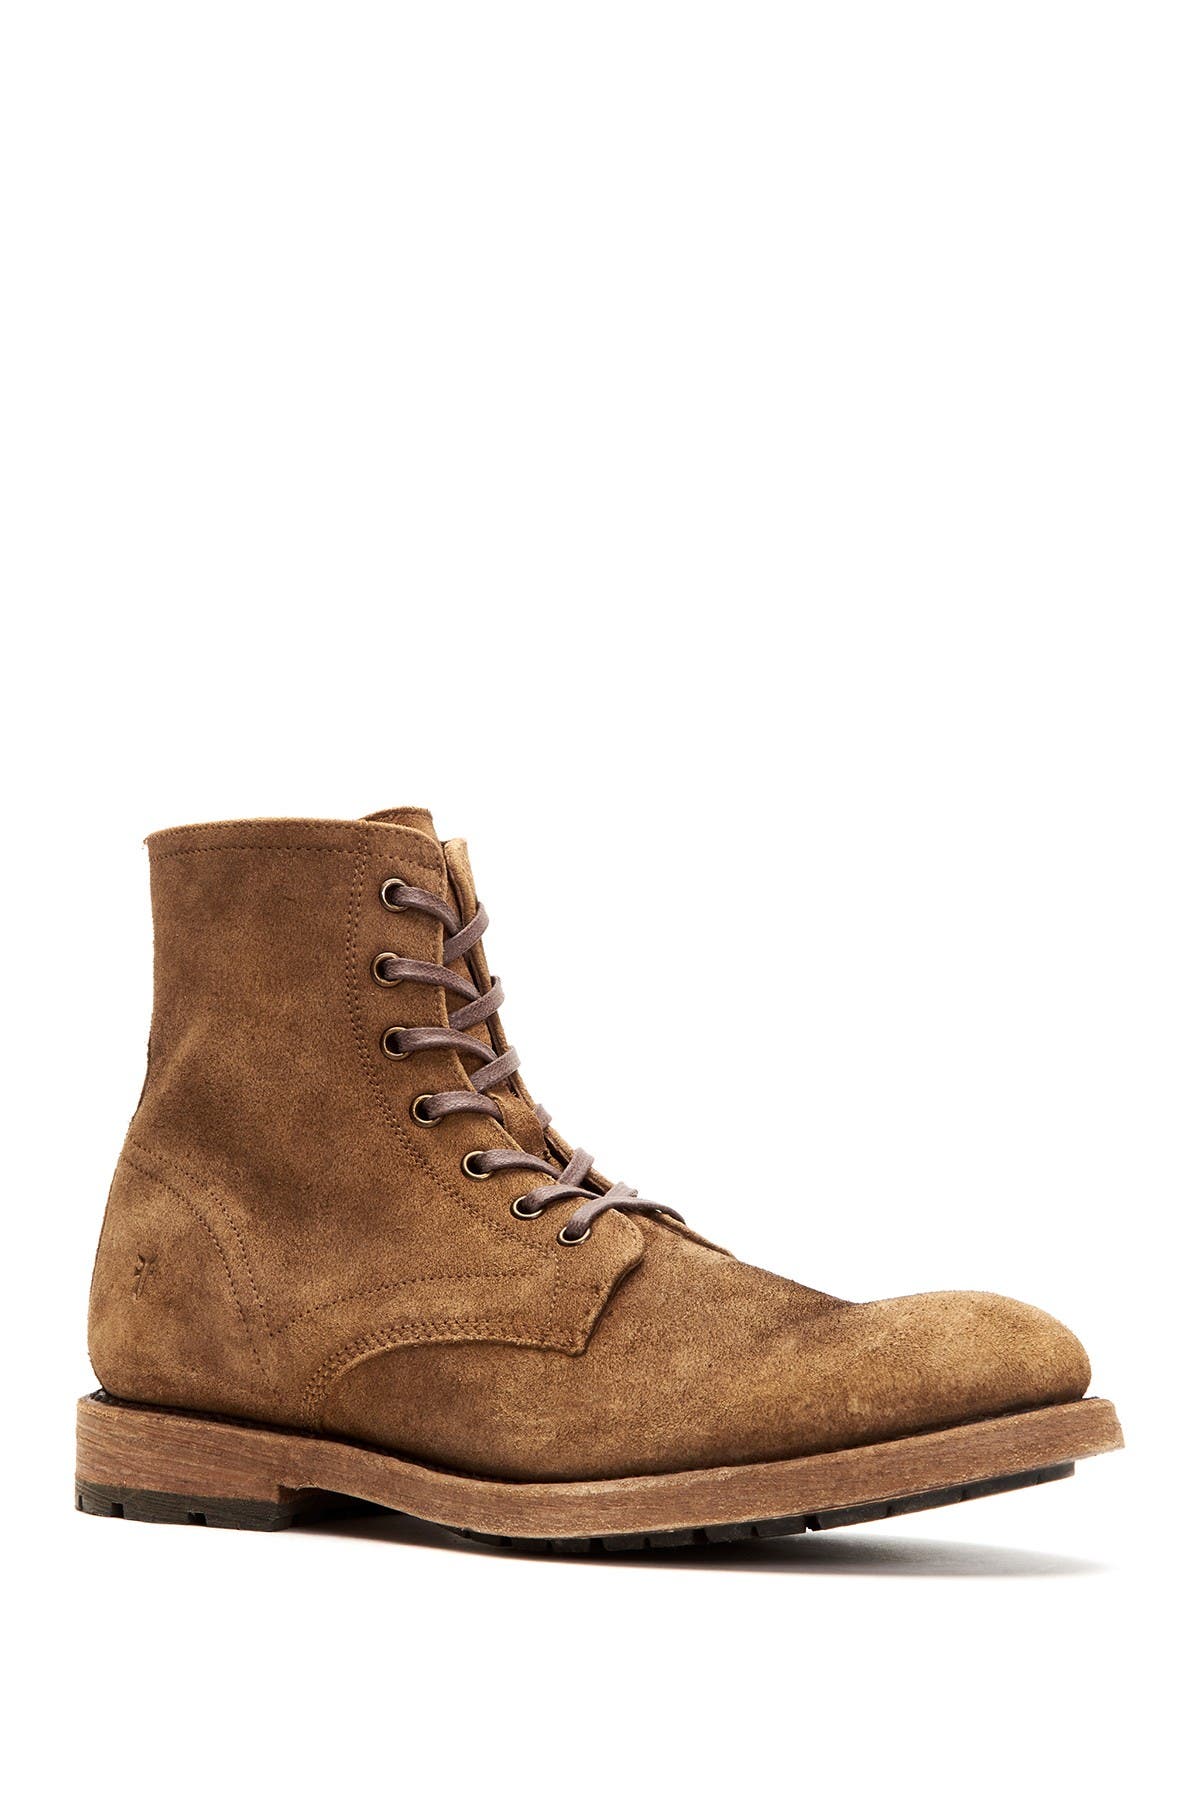 Frye | Bowery Lace Up Boot | Nordstrom Rack